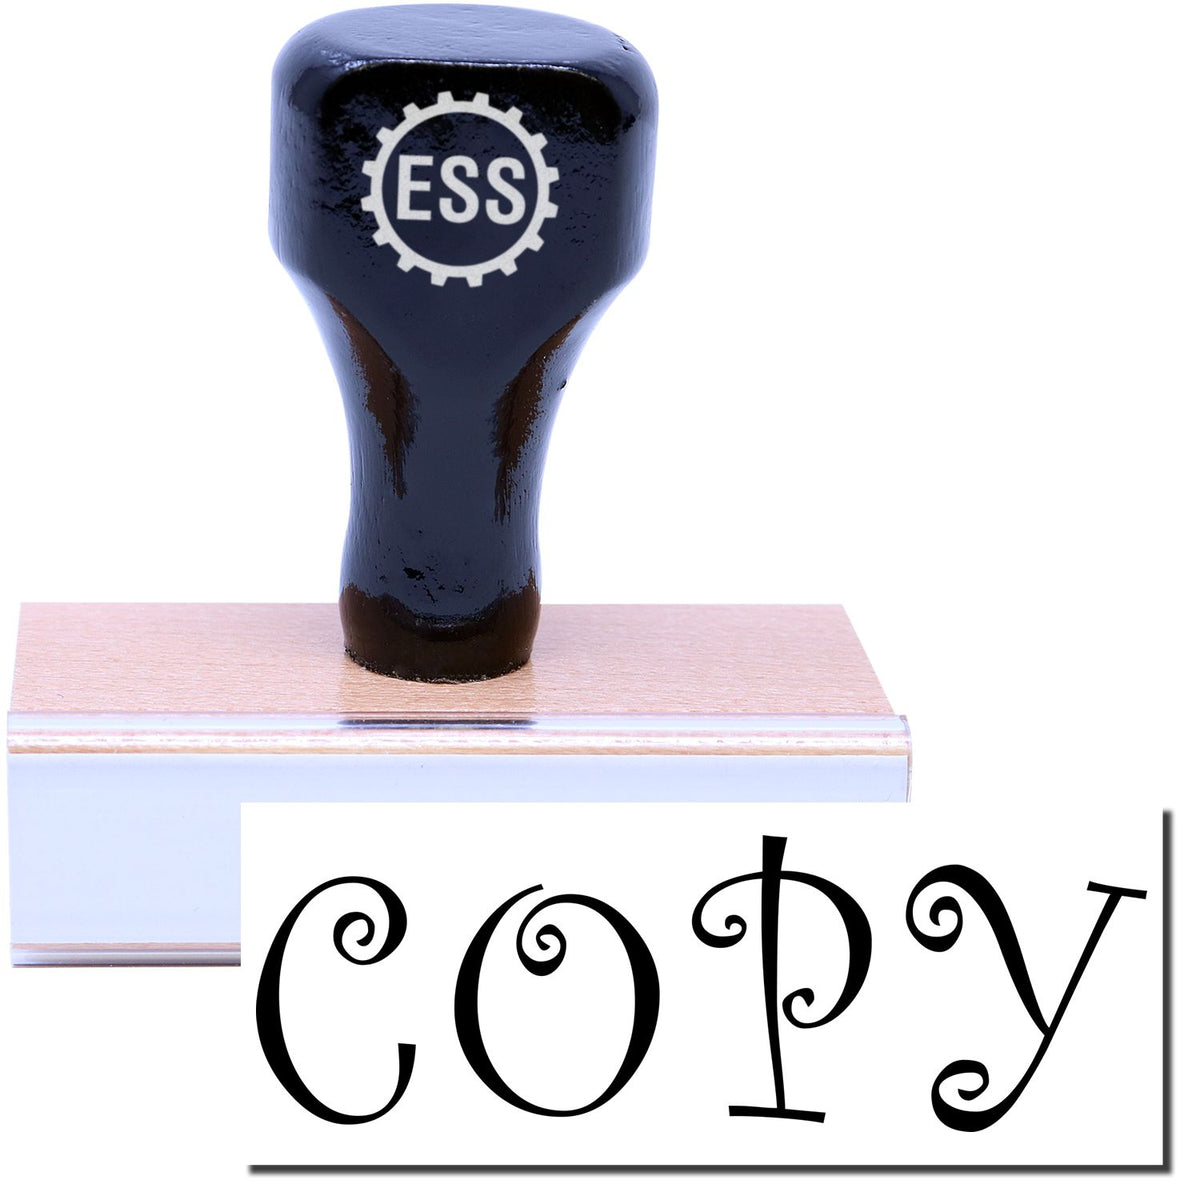 A stock office rubber stamp with a stamped image showing how the text &quot;COPY&quot; in a distinguishing curly font is displayed after stamping.